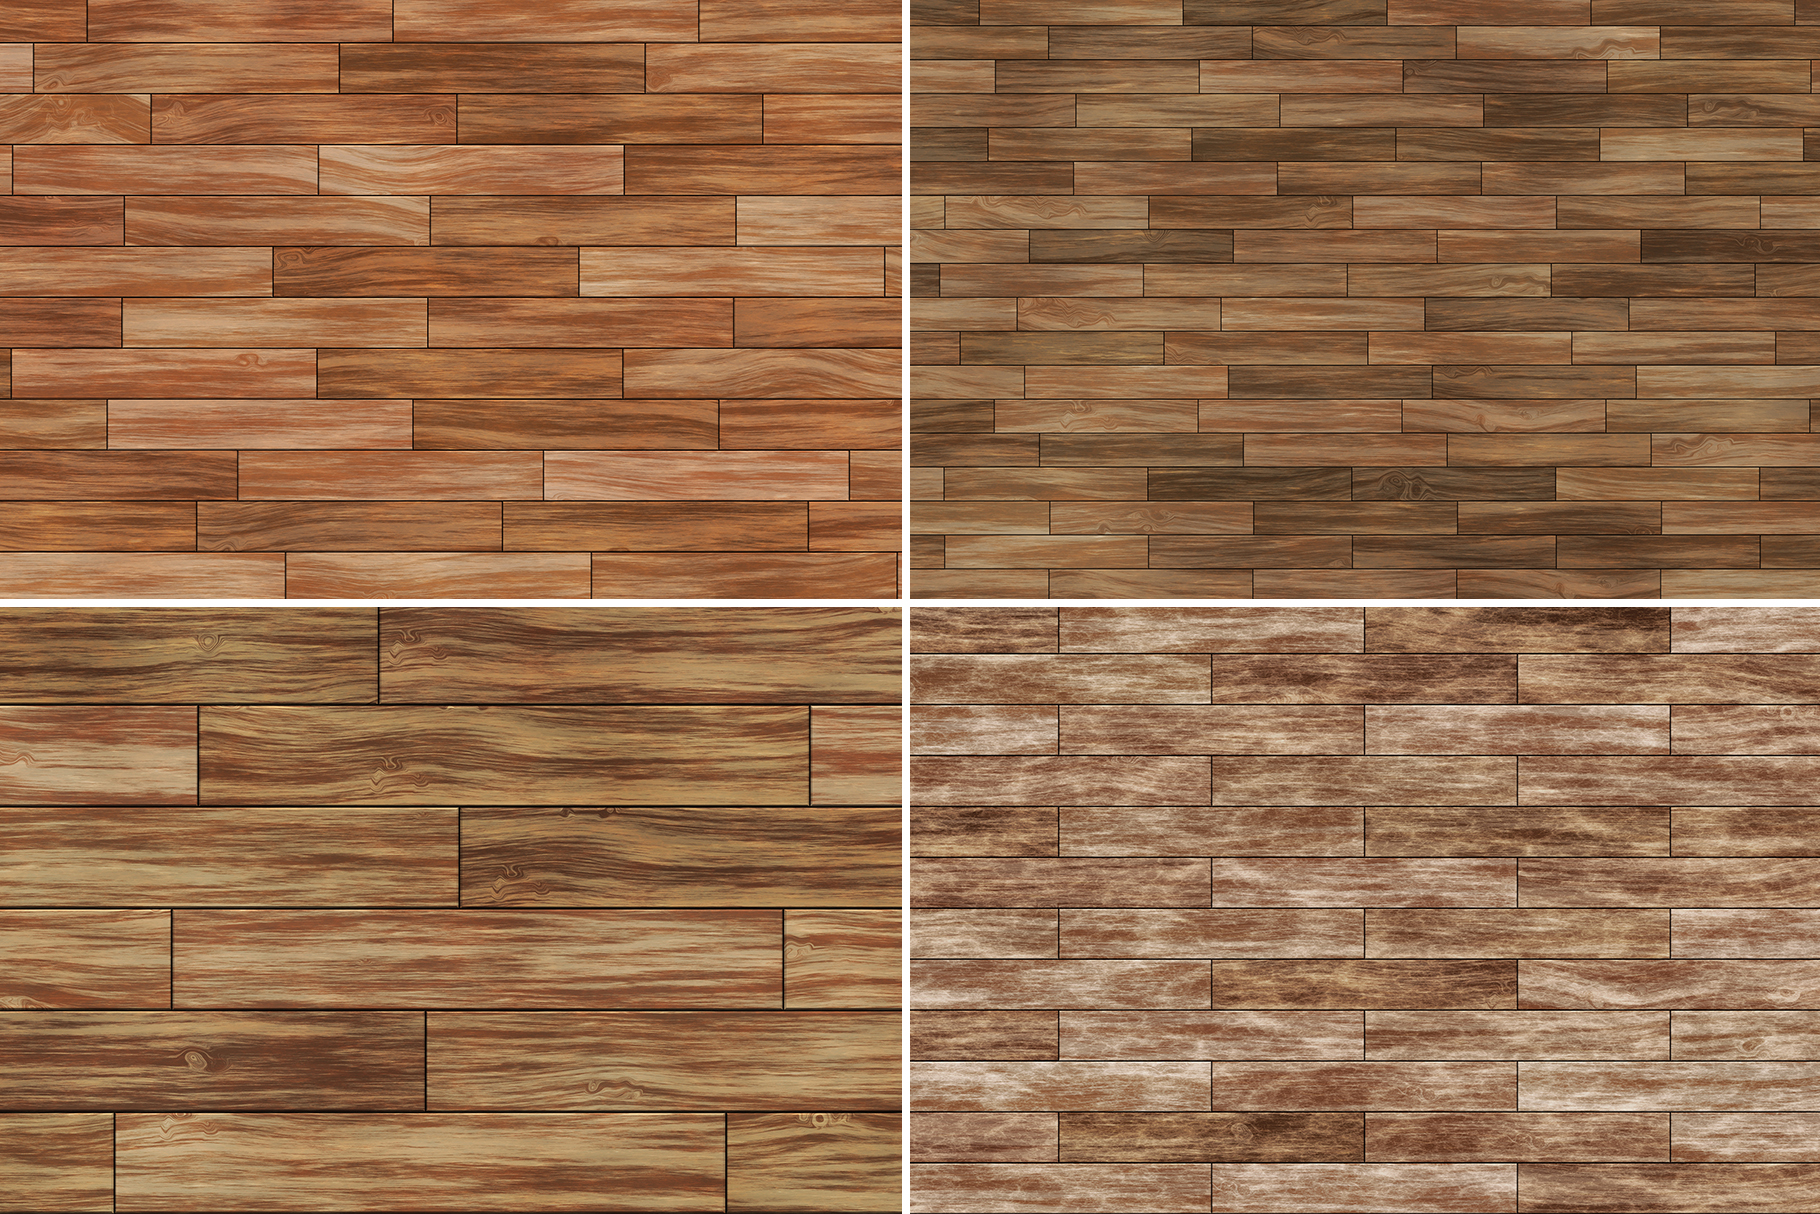 Wooden Background Hd posted by Ryan Sellers